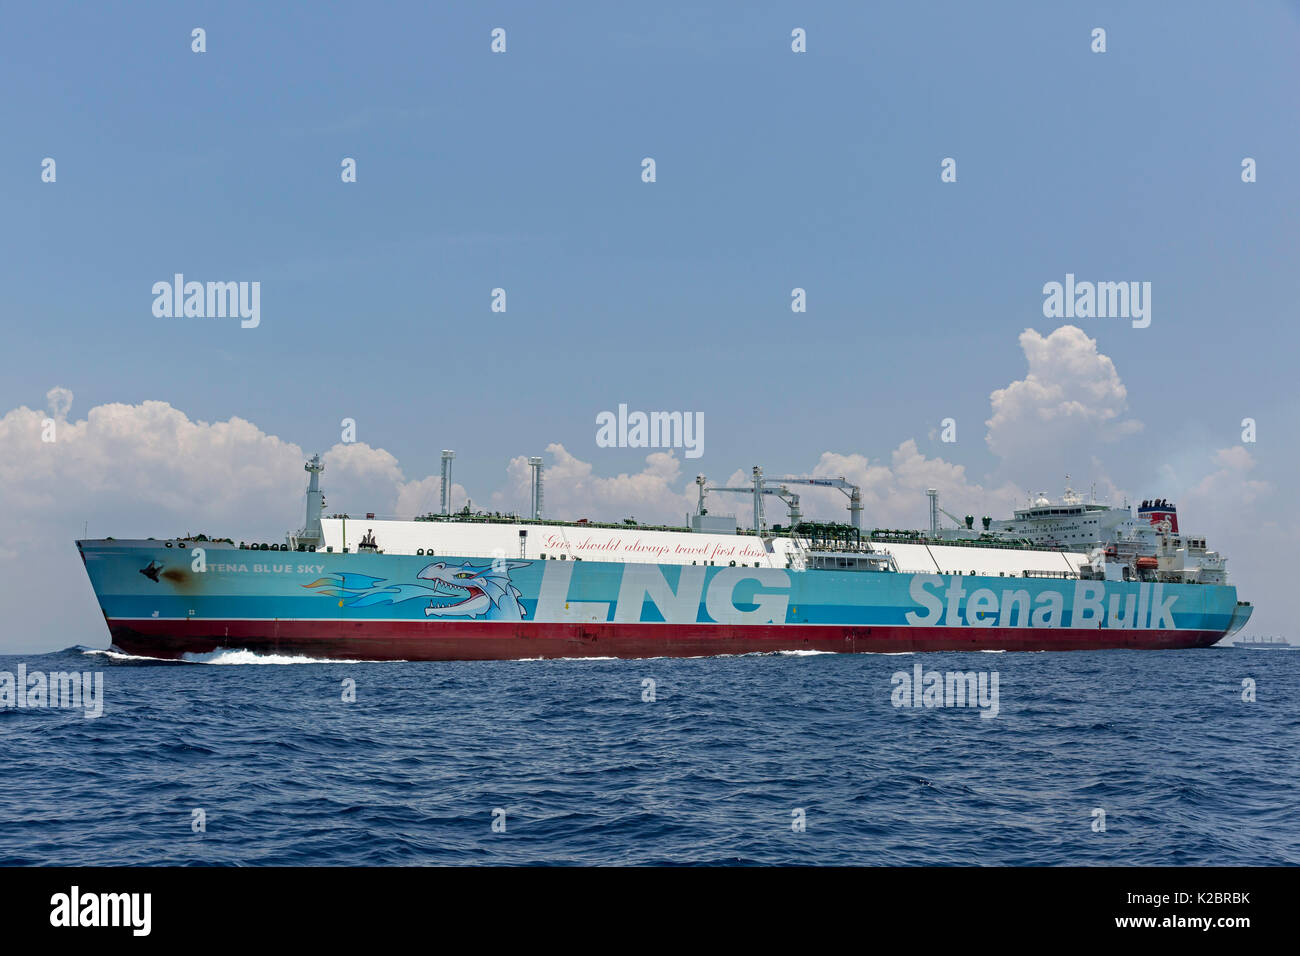 Stena 'Blue Sky' gas tanker, out of Mirissa, Sri Lanka, Indian Ocean. All non-editorial uses must be cleared individually. Stock Photo